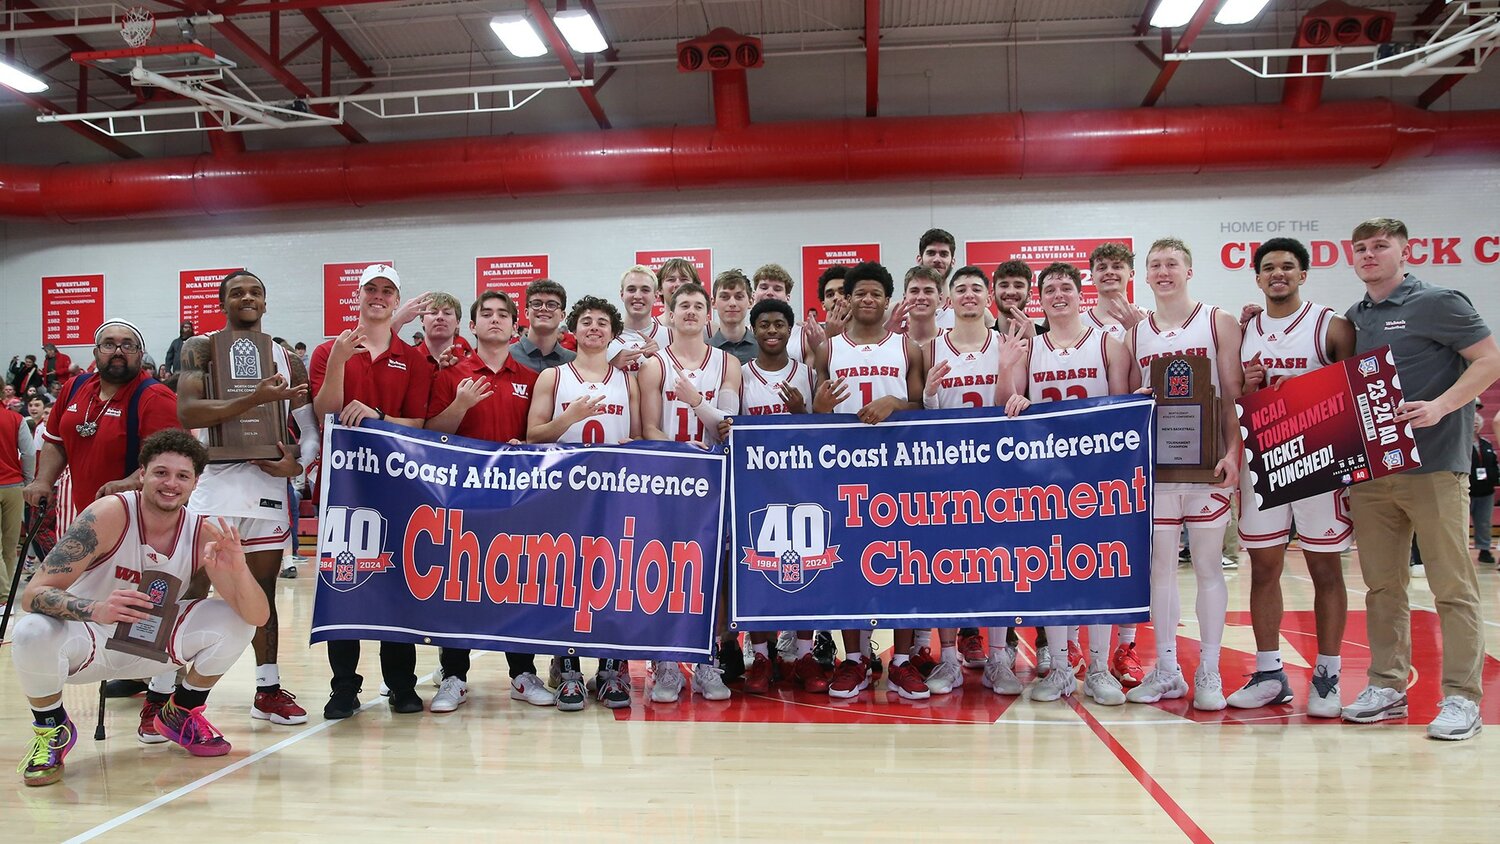 Wabash College Men’s Basketball gets to stay in Indiana for the opening round of the NCAA Division III Tournament as they’ll travel to Trine University on Friday to take on Coe College. Wabash and Coe will play at 5:40 p.m.